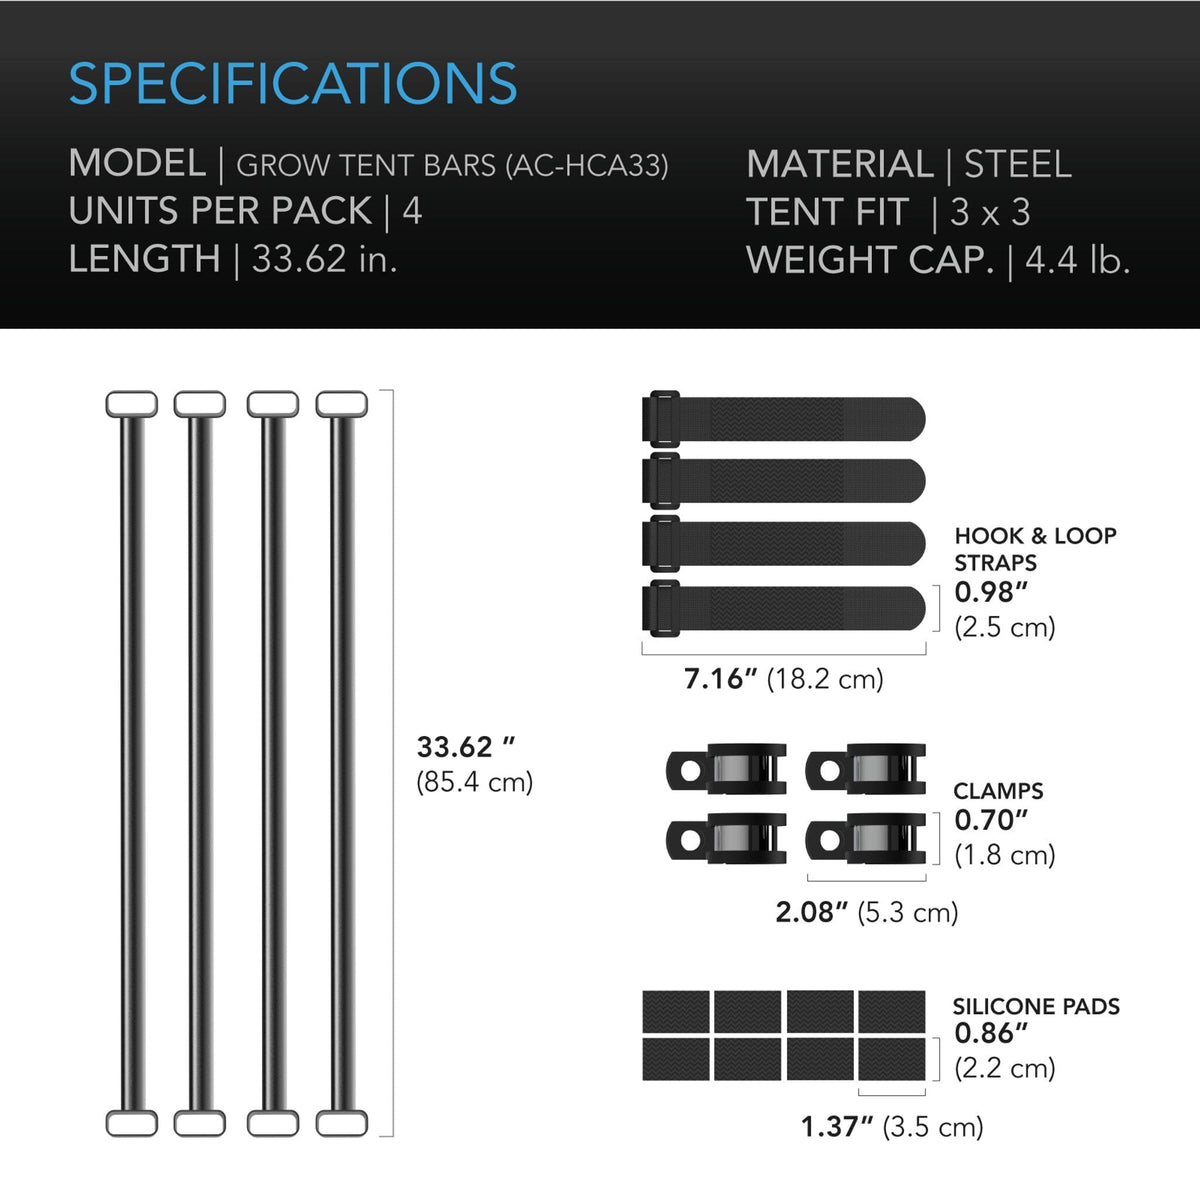 Grow tent mounting bars 3x3 specifications